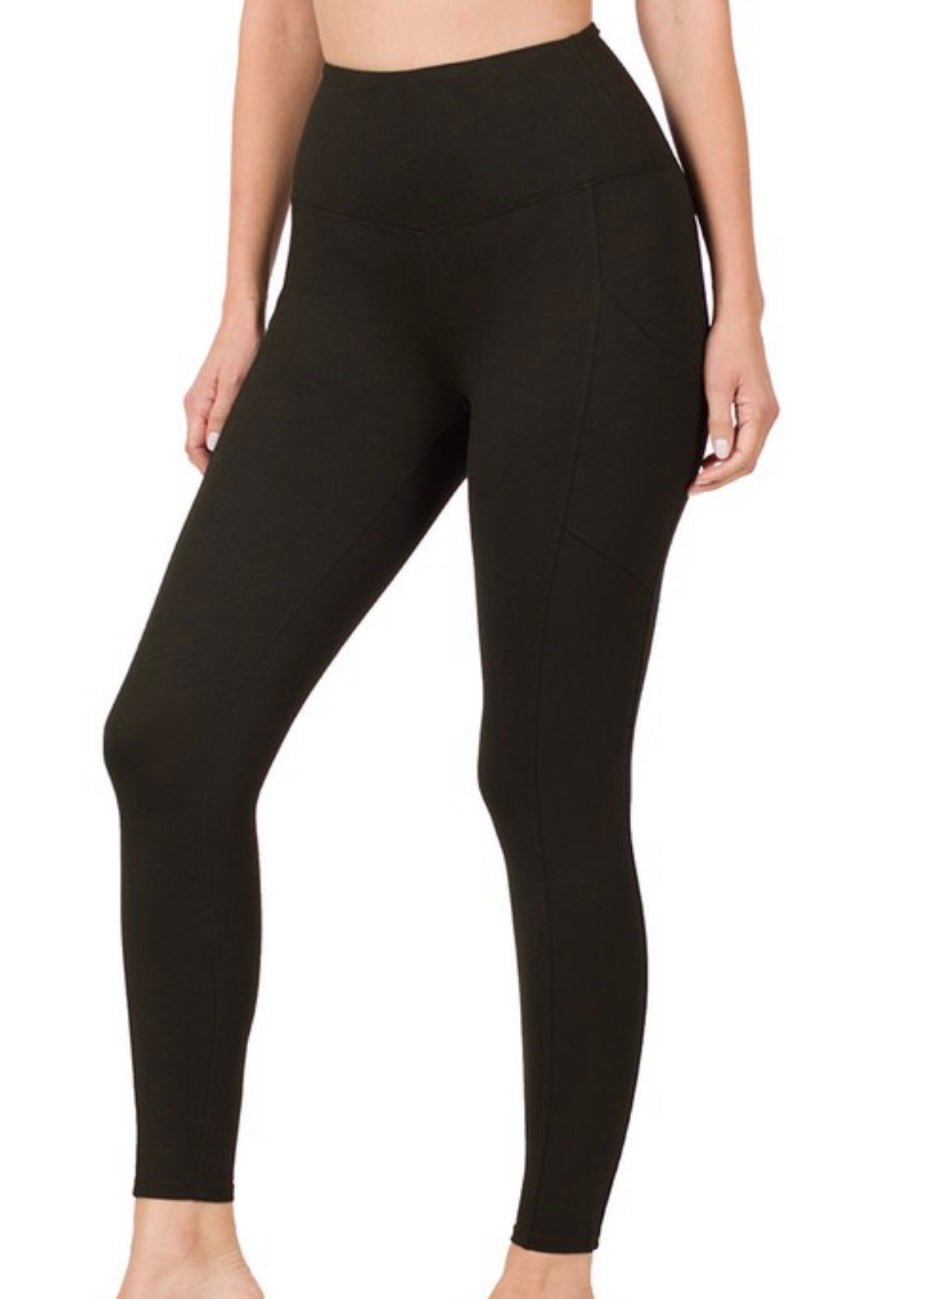 Microfiber Full Length Leggings With Pockets - Black - Jimberly's Boutique